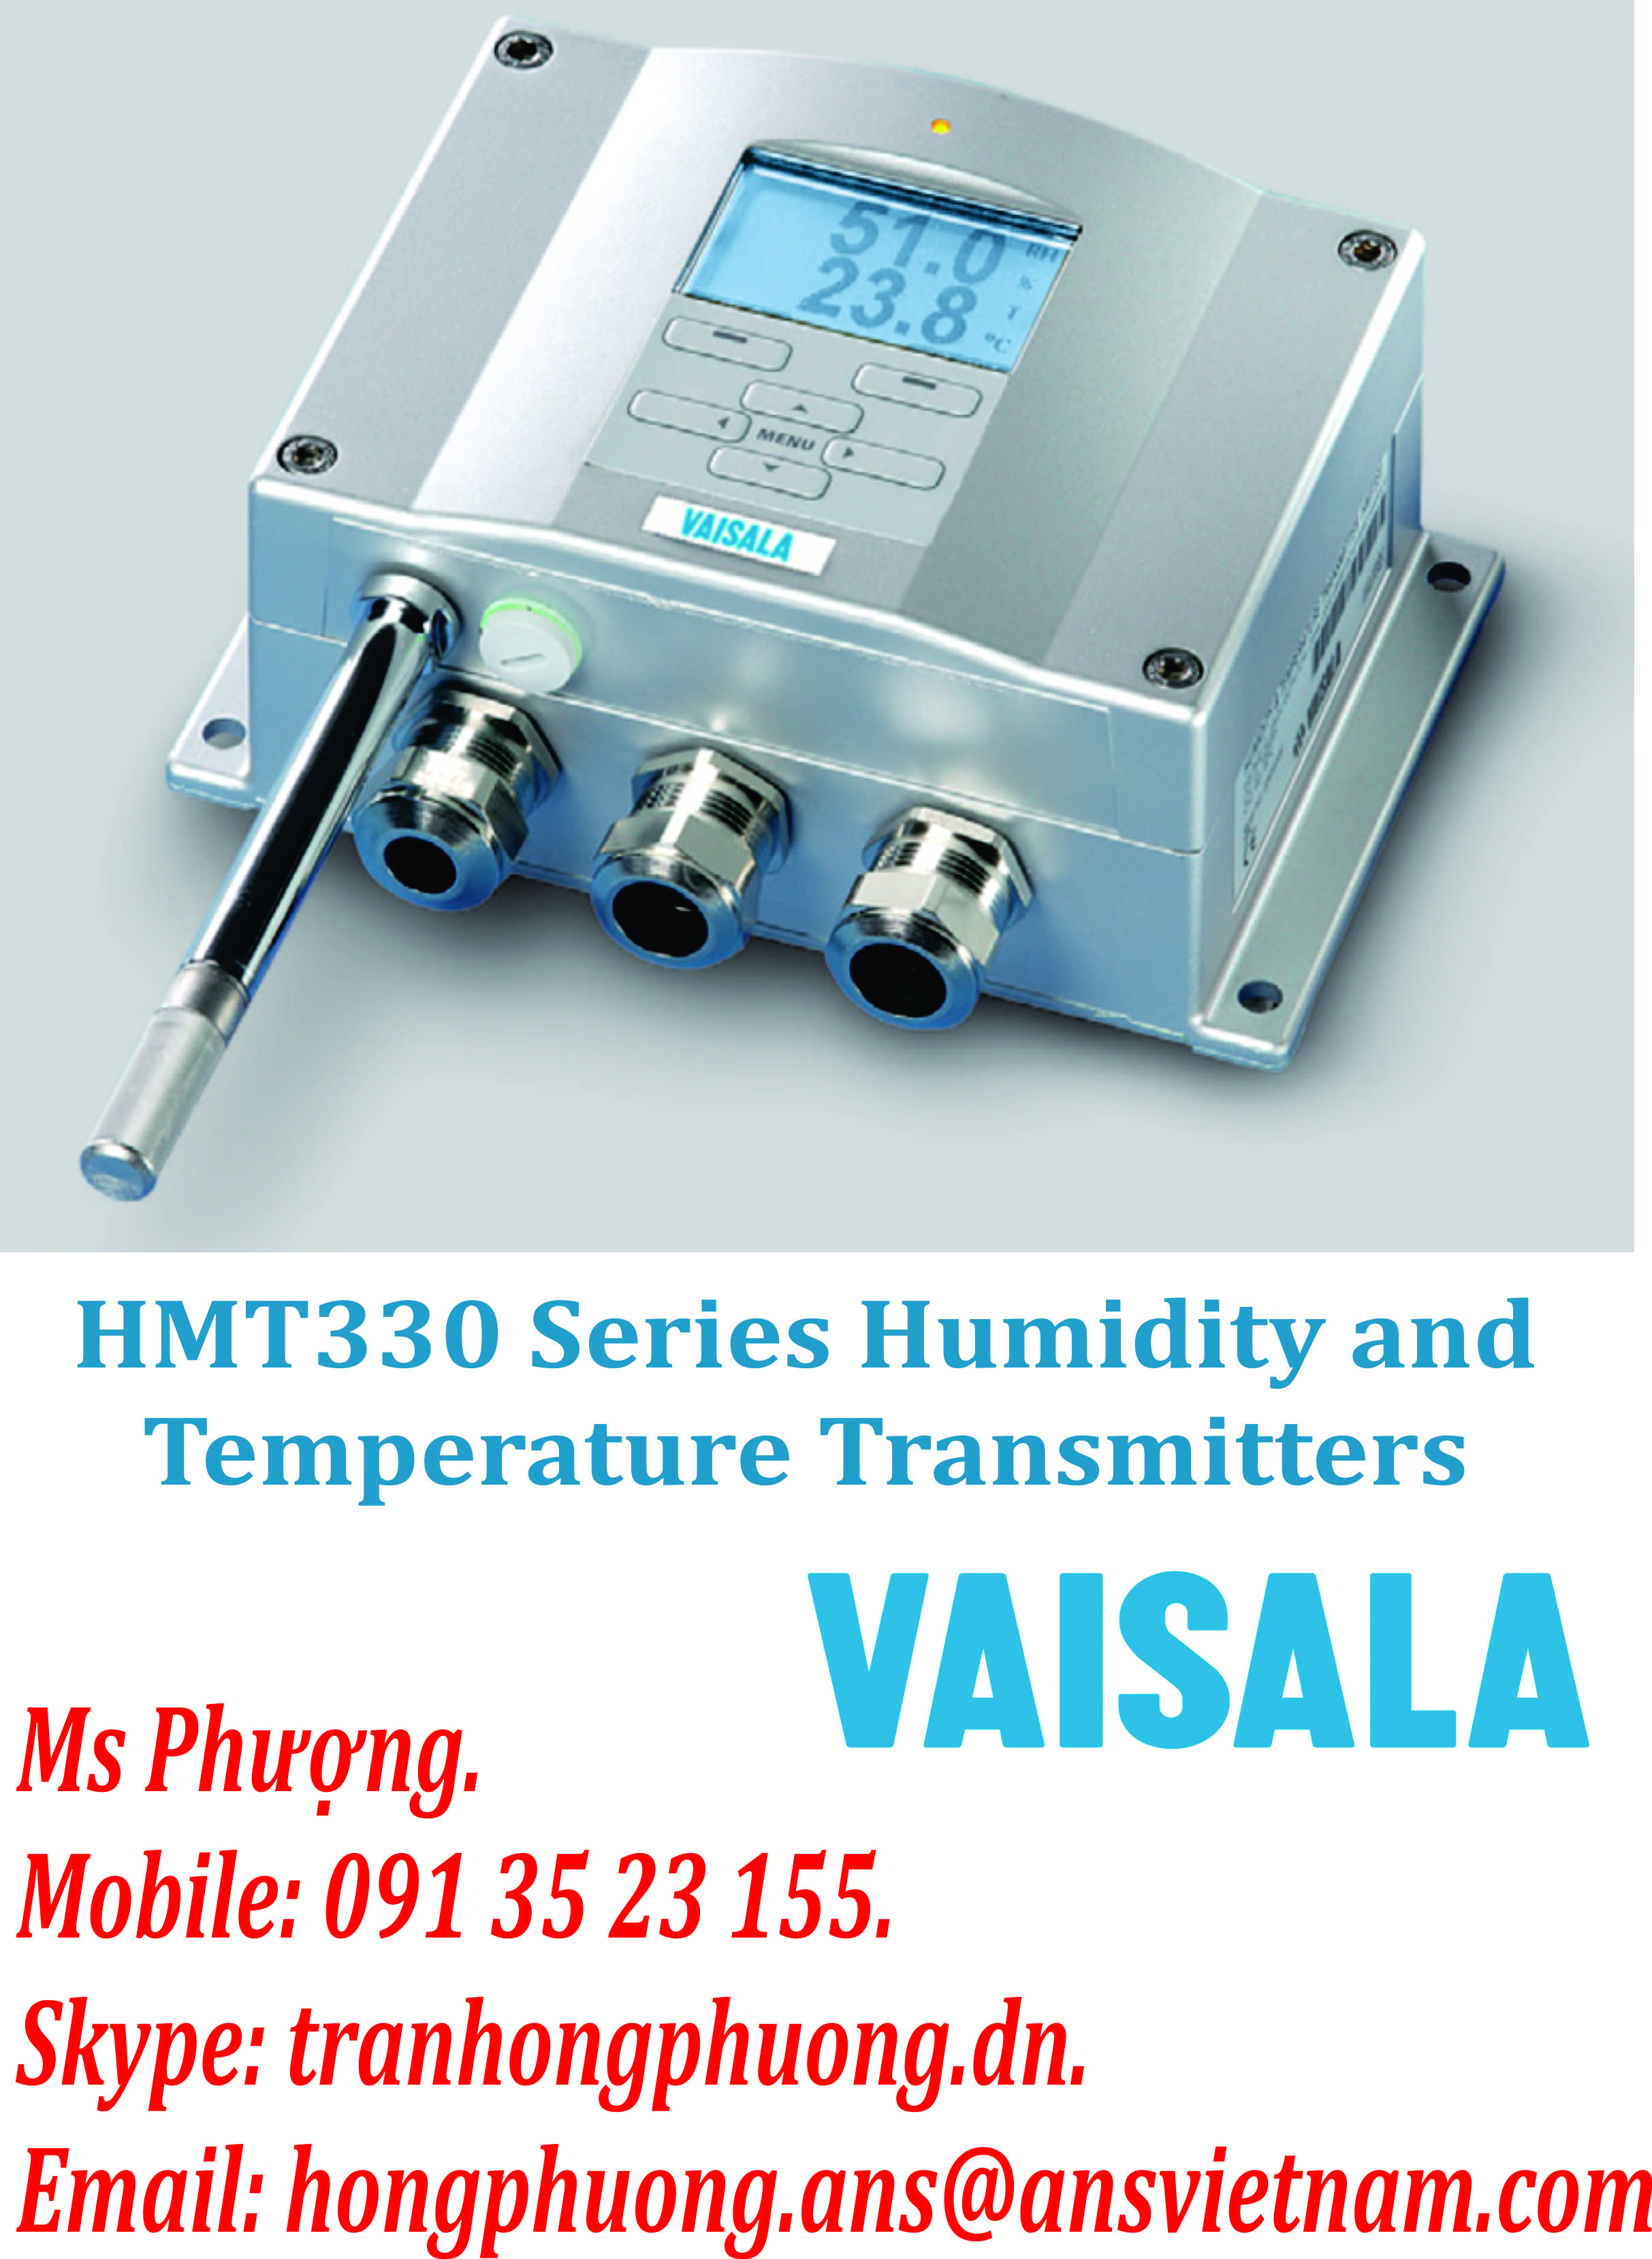 hmt330-series-humidity-and-temperature-transmitters.png